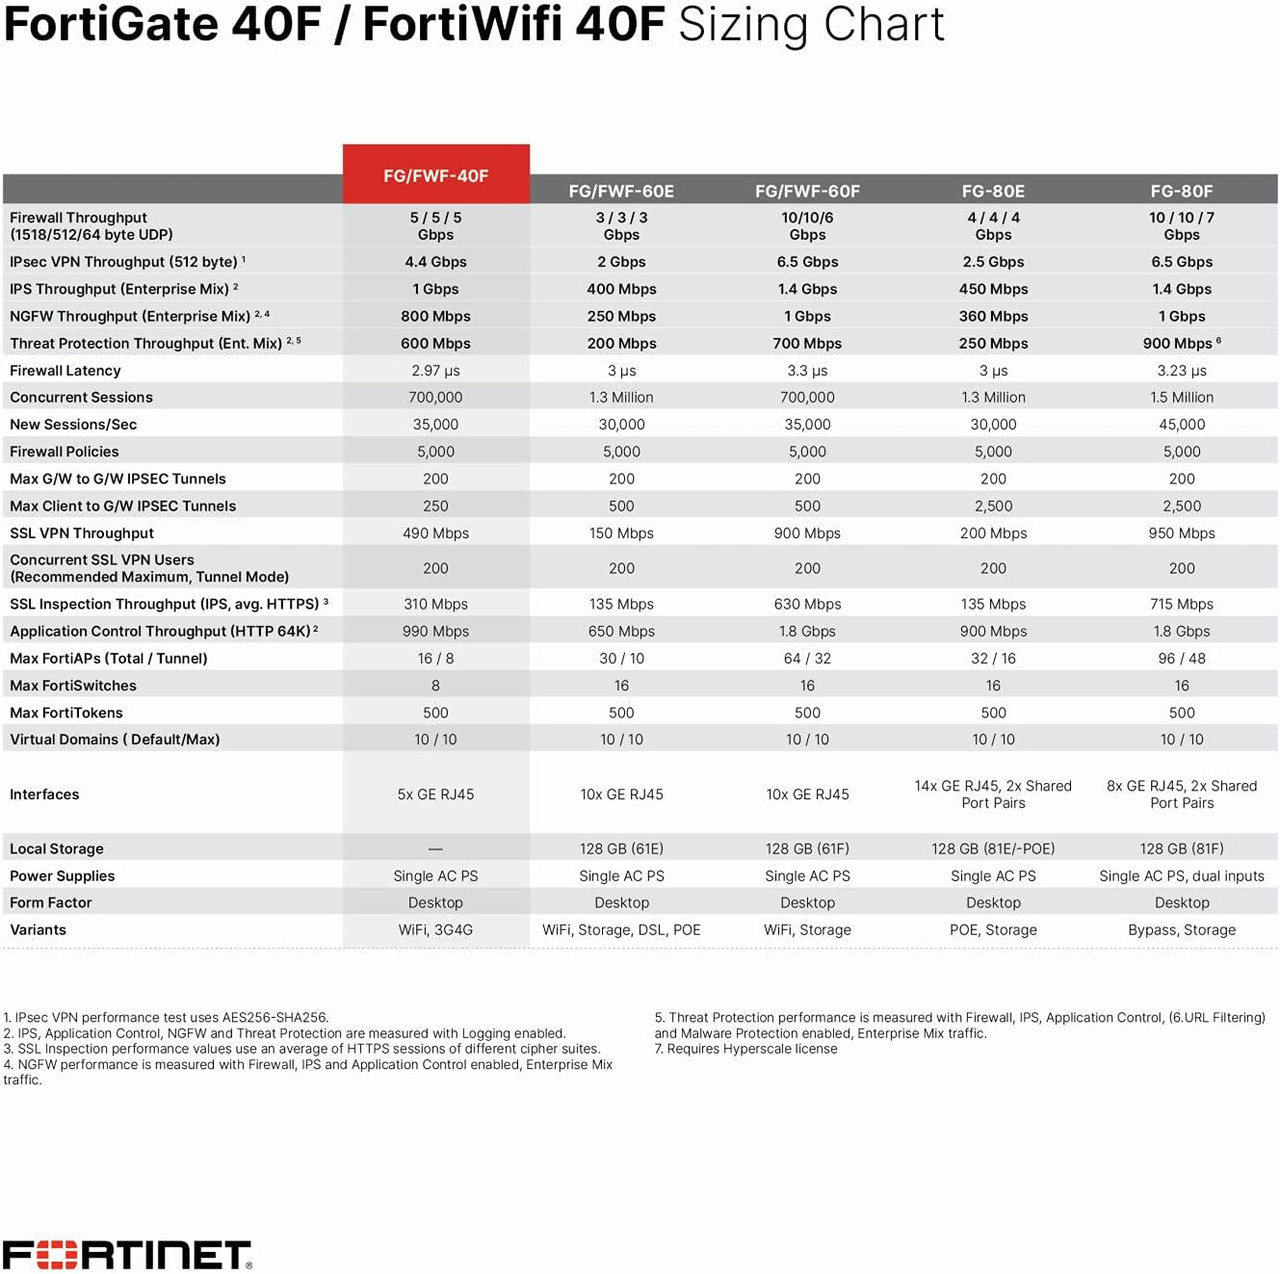 FORTINET FortiGate 40F Hardware Next-Gen Firewall Protection & Security (FG-40F)